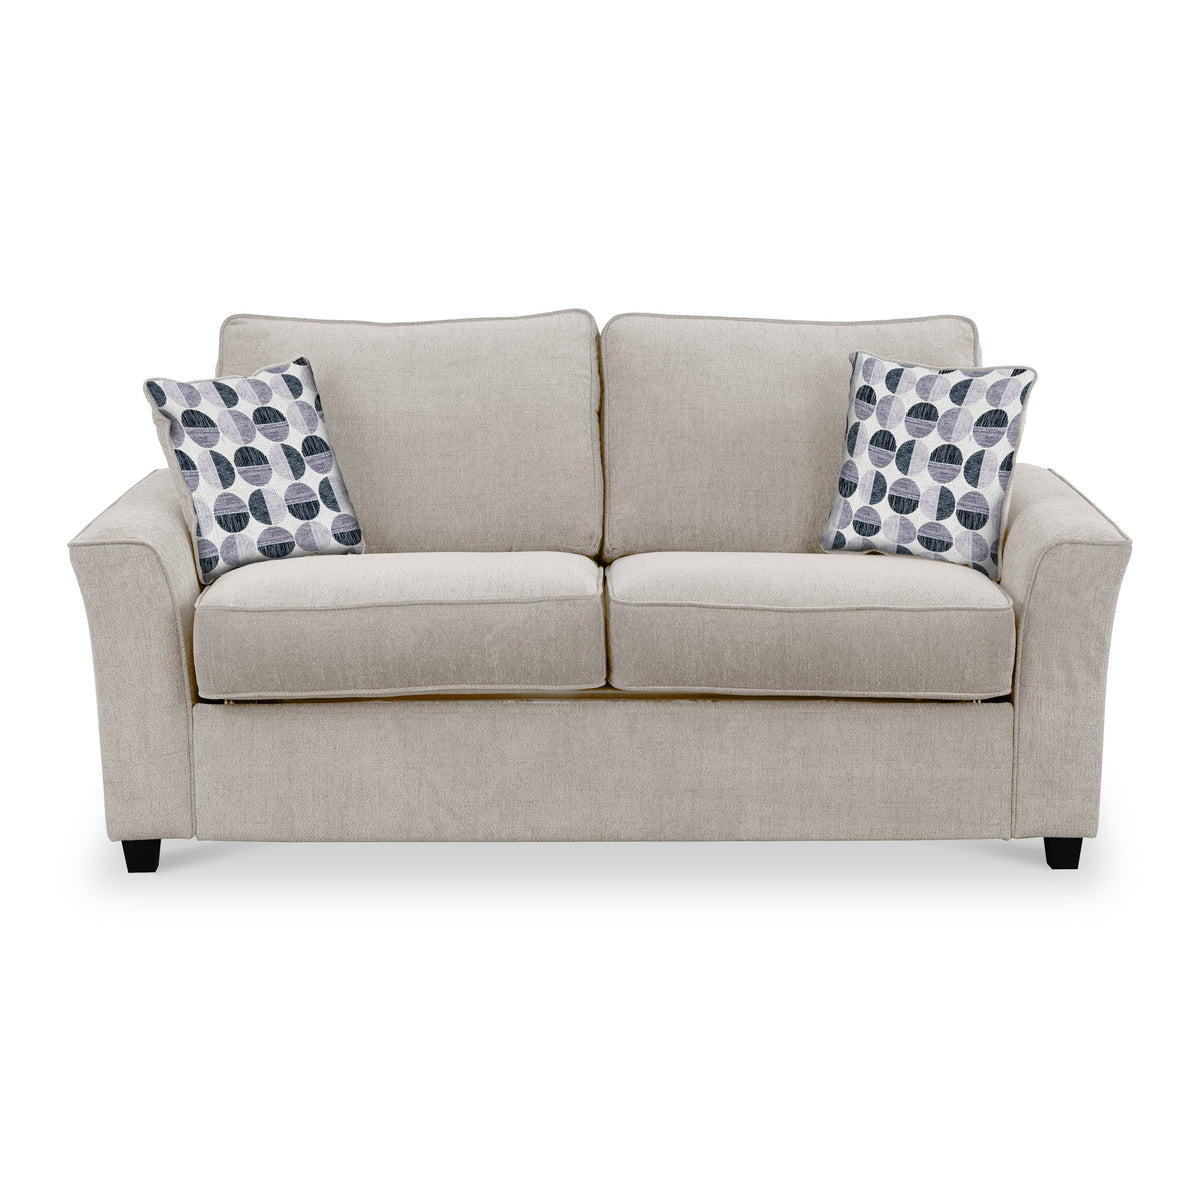 Boston 2 Seater Sofabed in Oatmeal with Rufus Mono Cushions by Roseland Furniture